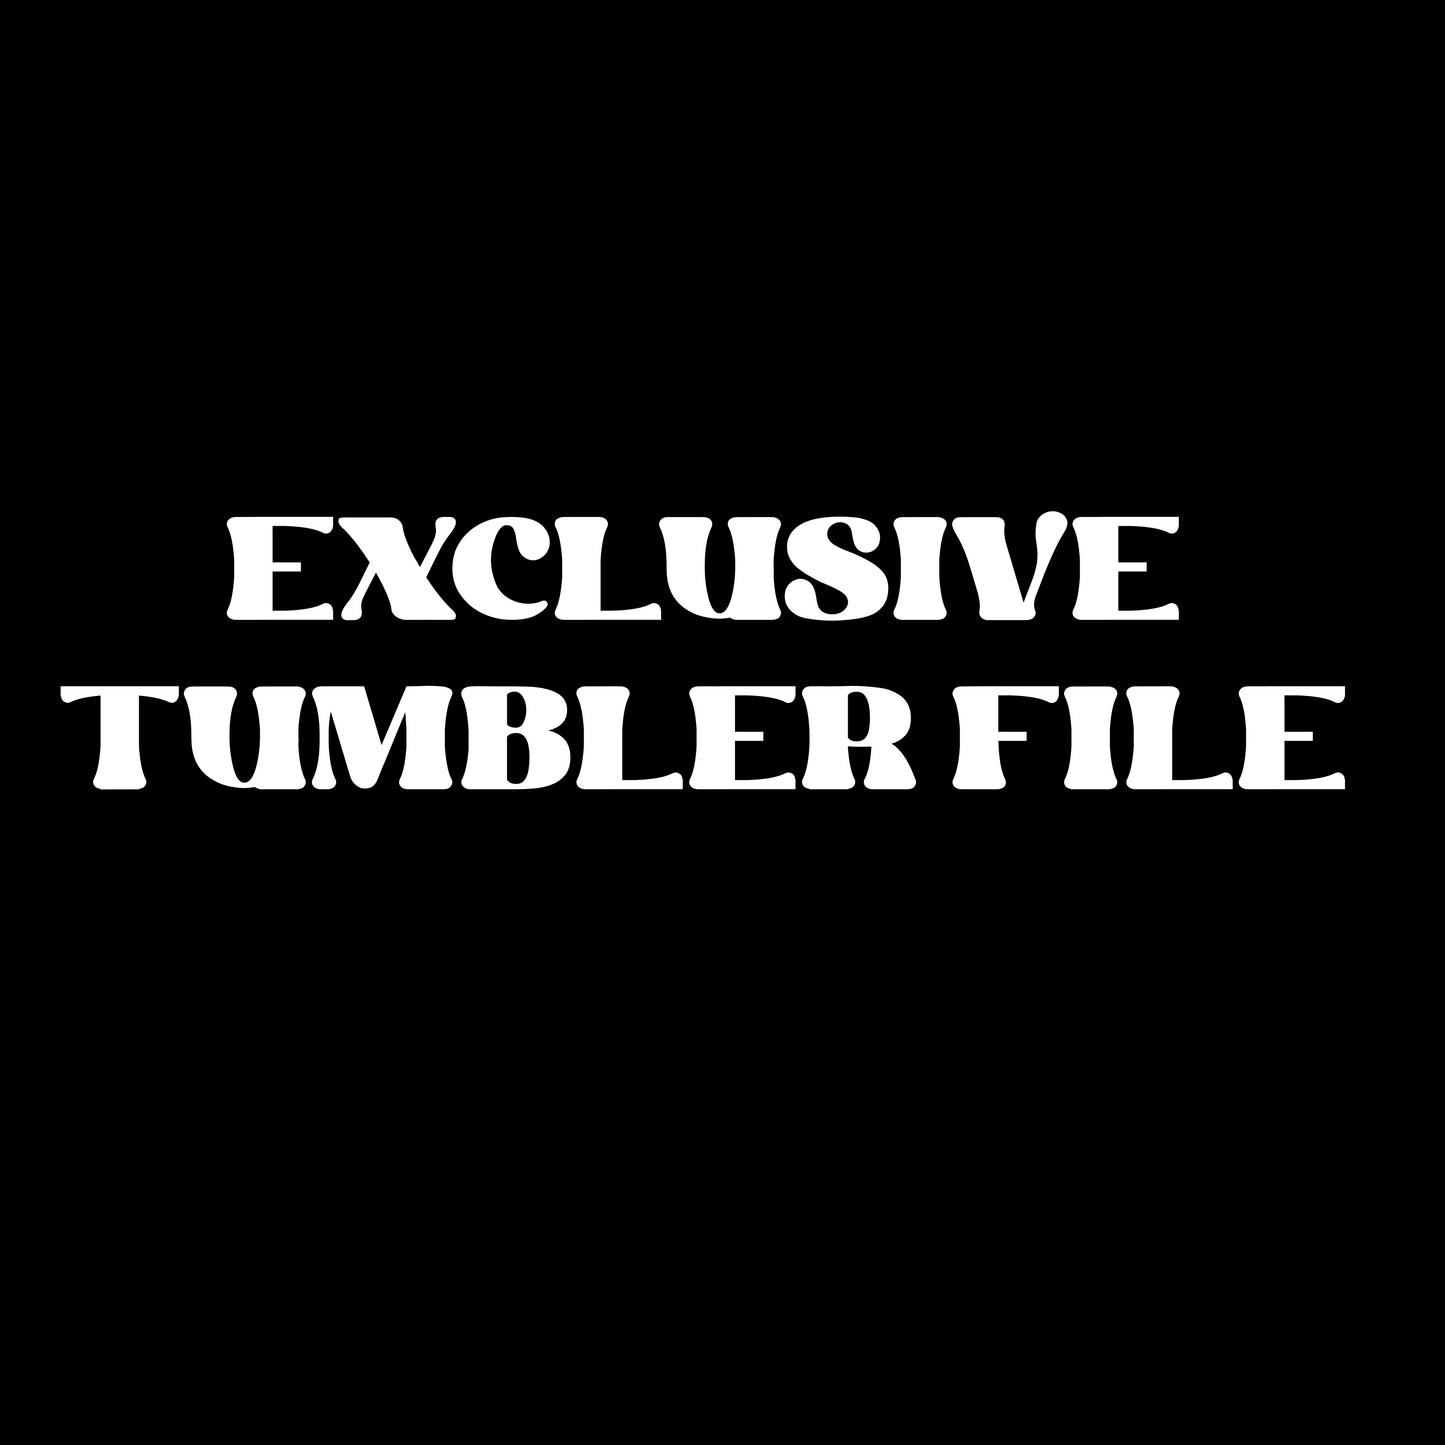 Exclusive tumbler file (you proof)